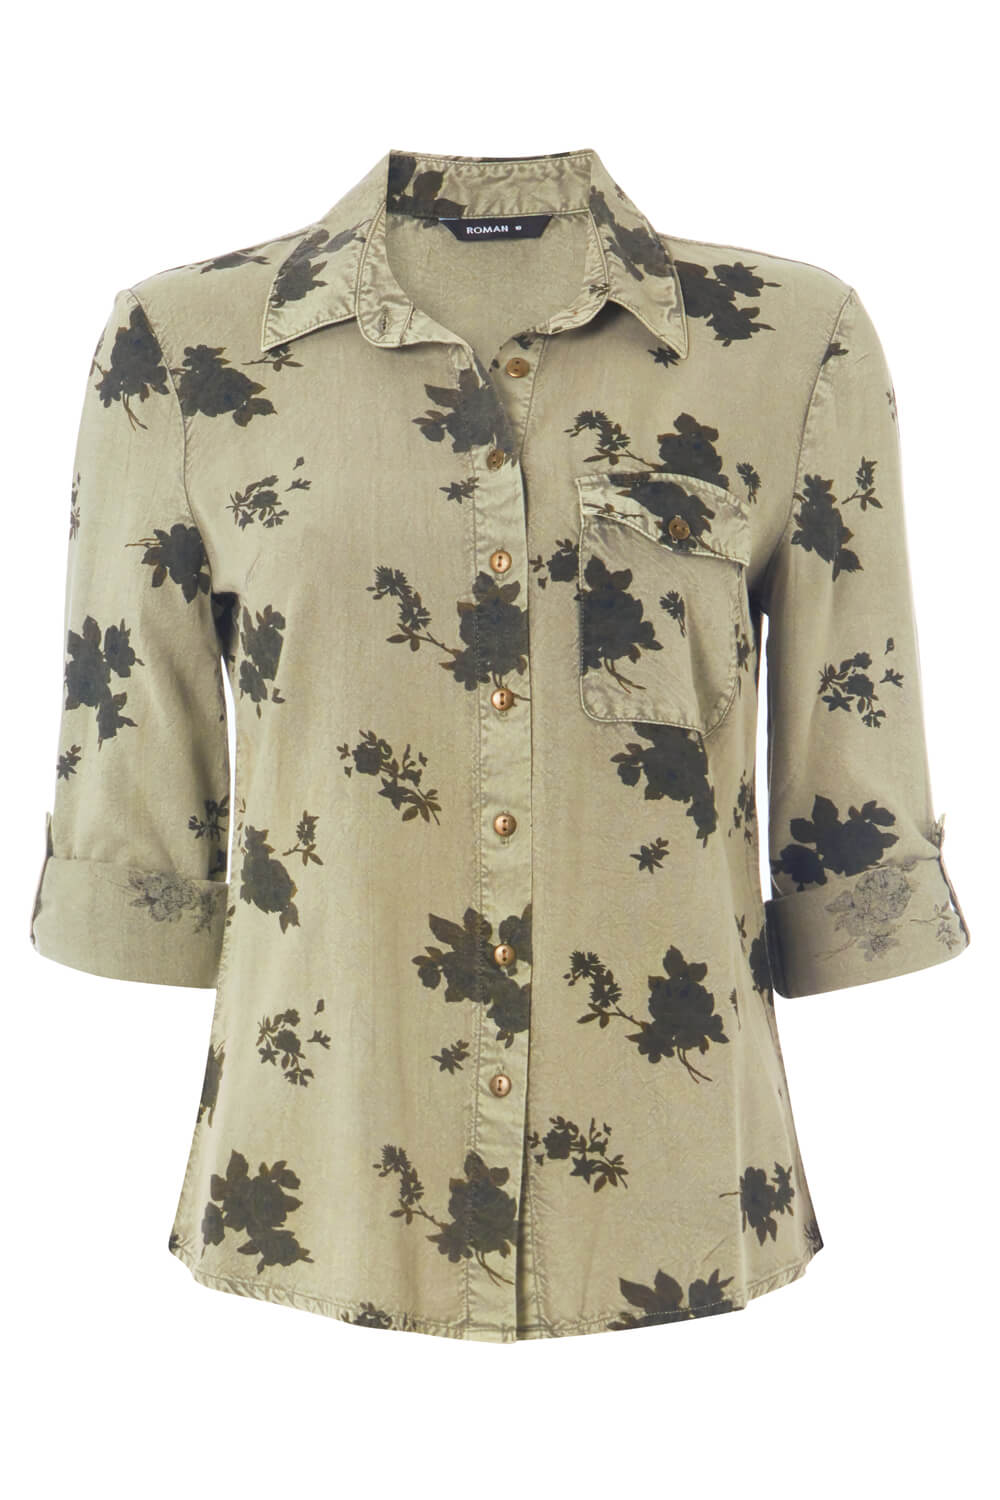 KHAKI Floral Roll Sleeve Shirt, Image 5 of 9